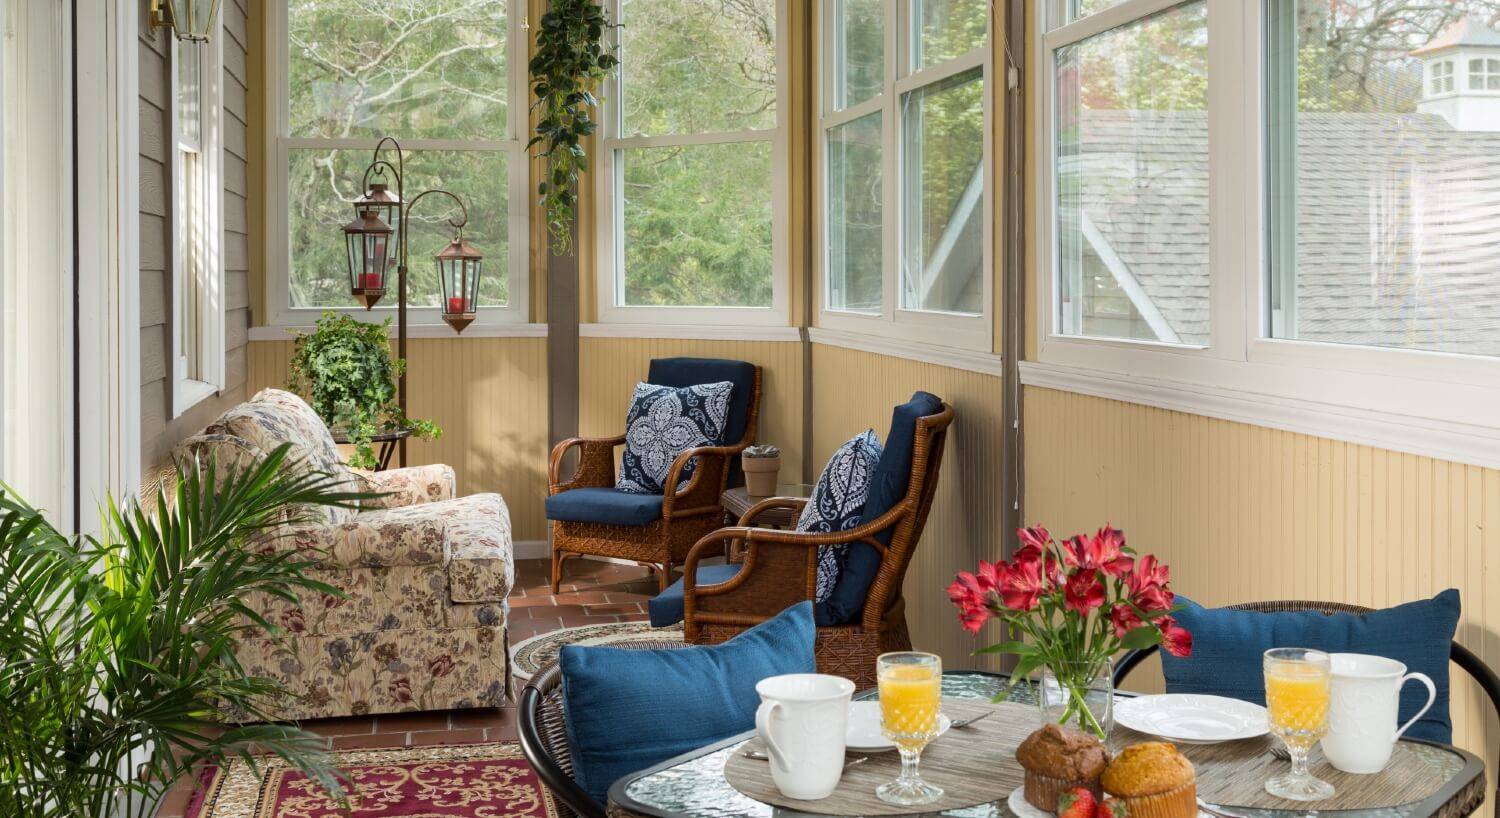 Sitting room surrounded by windows with three chairs and table set for two with muffins, coffee cups and glasses of orange juice